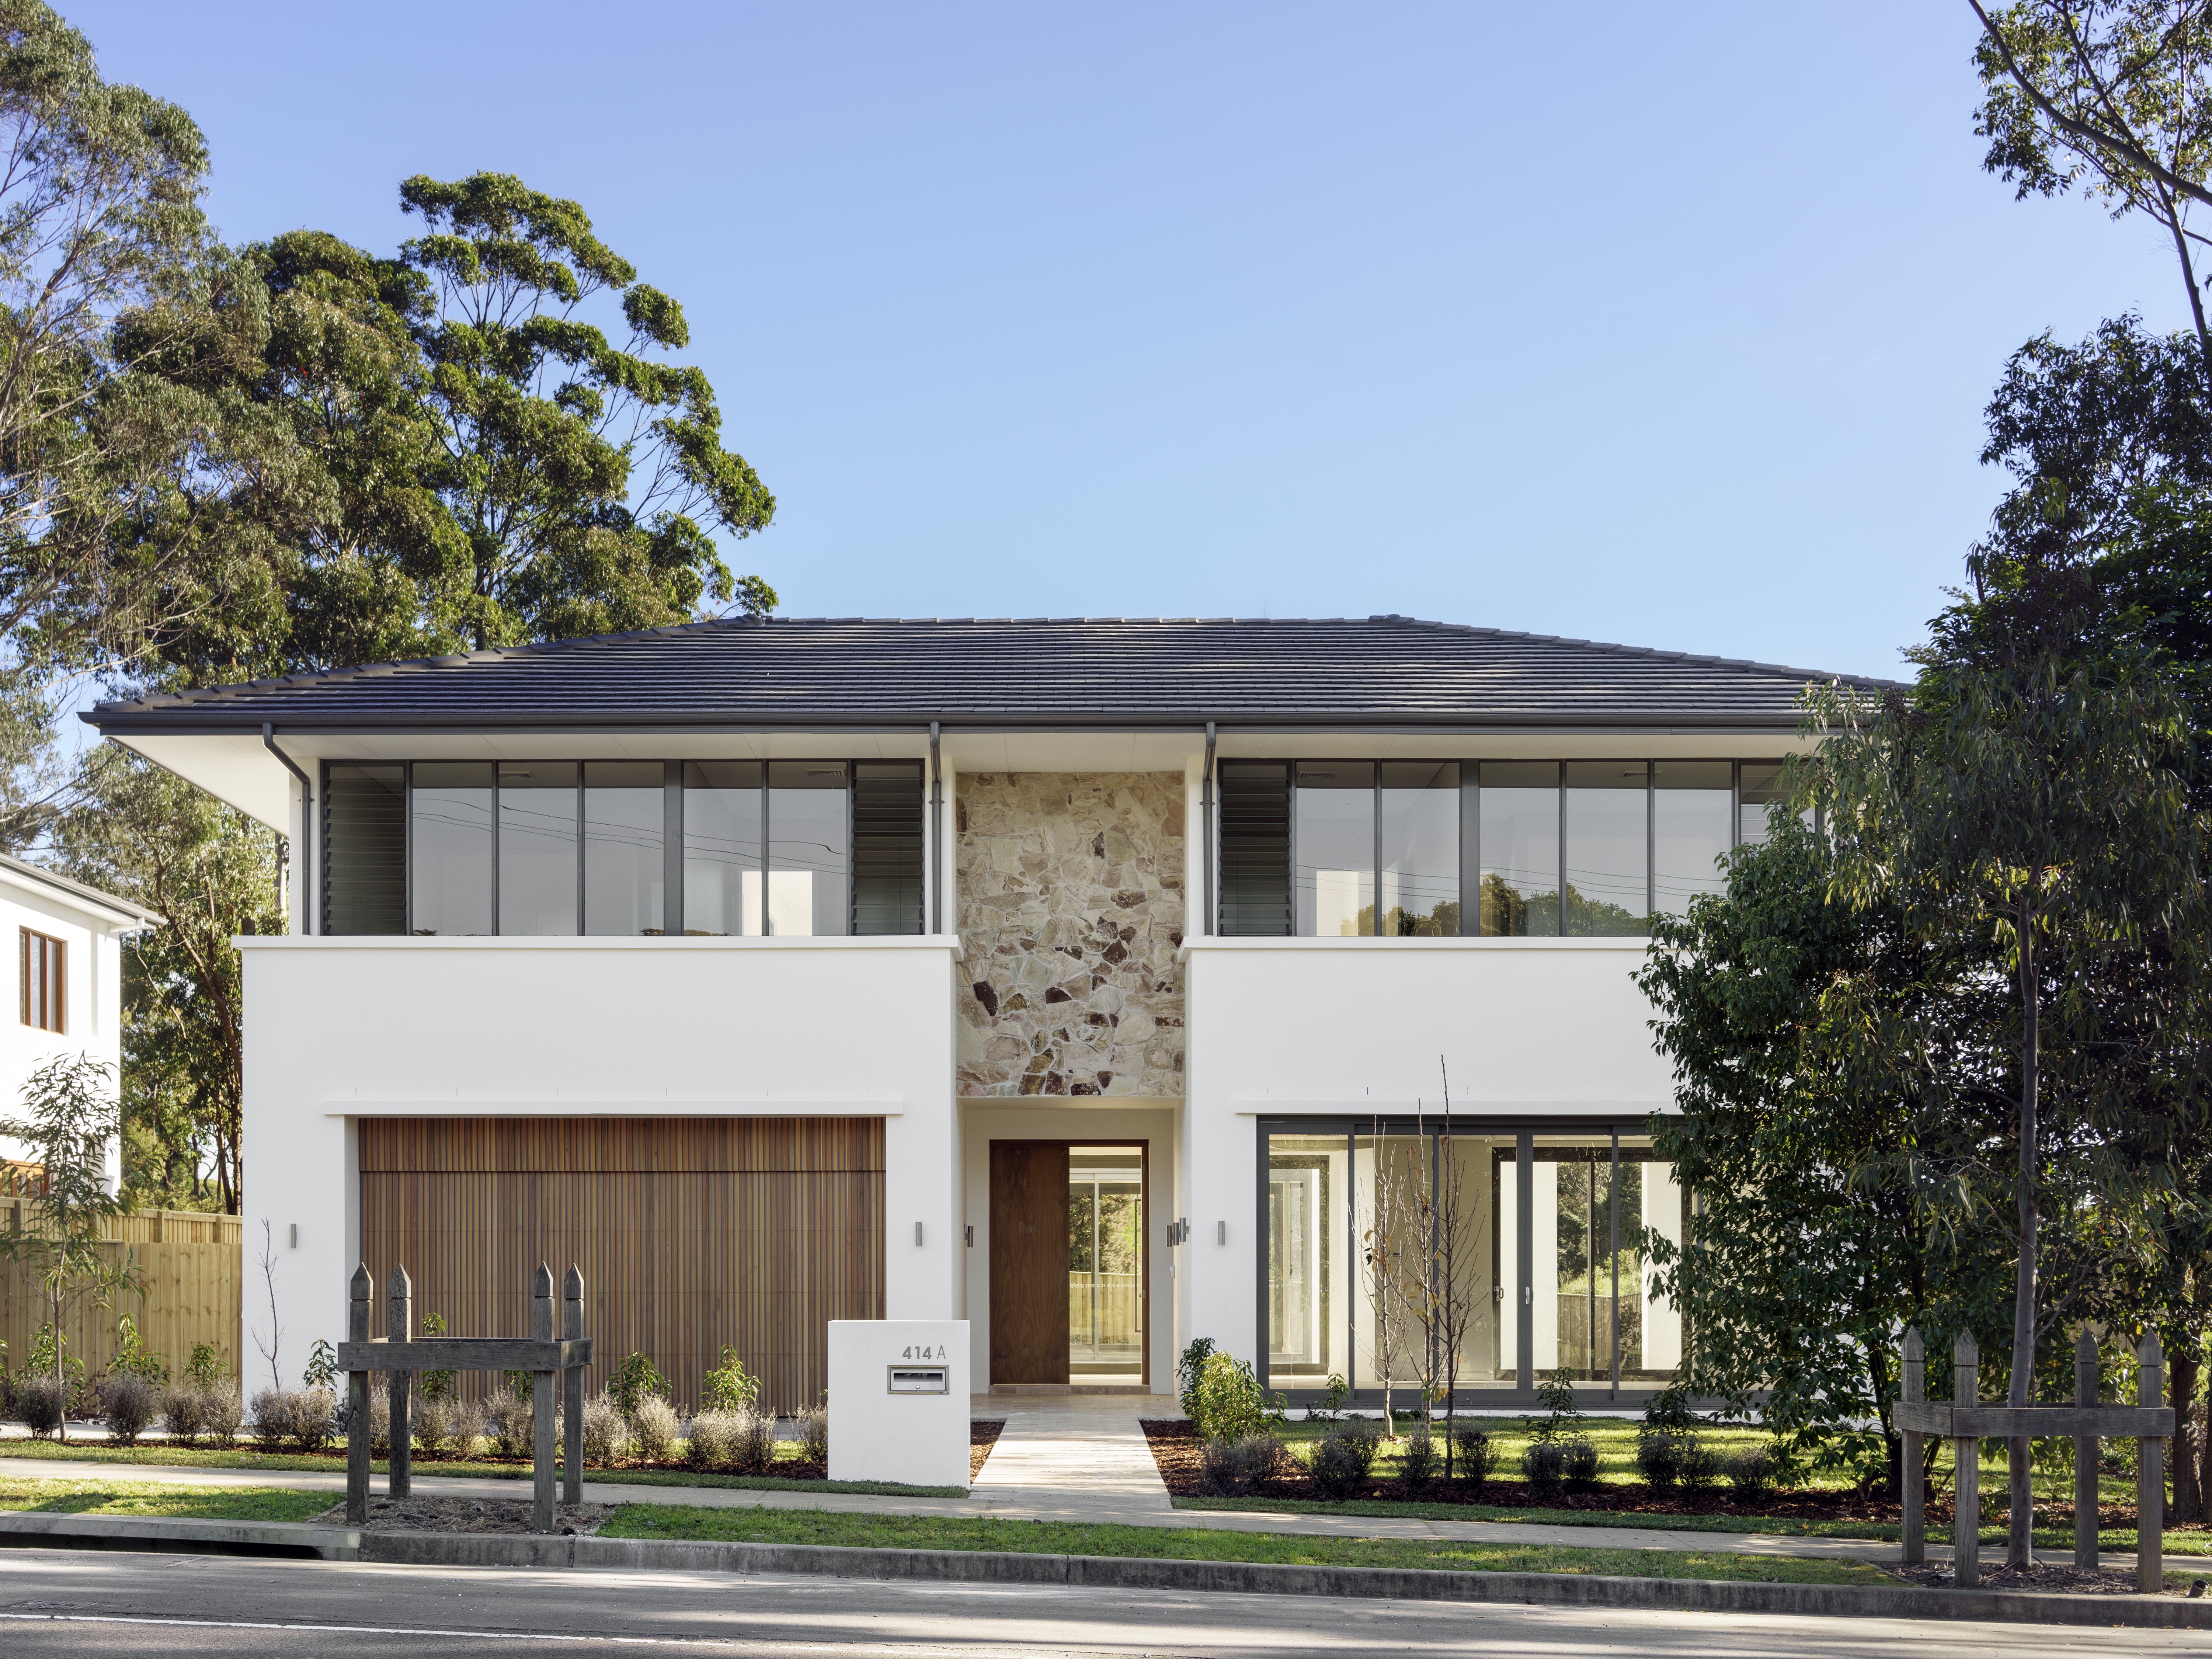 SOLD OUT - St Columbans Turramurra